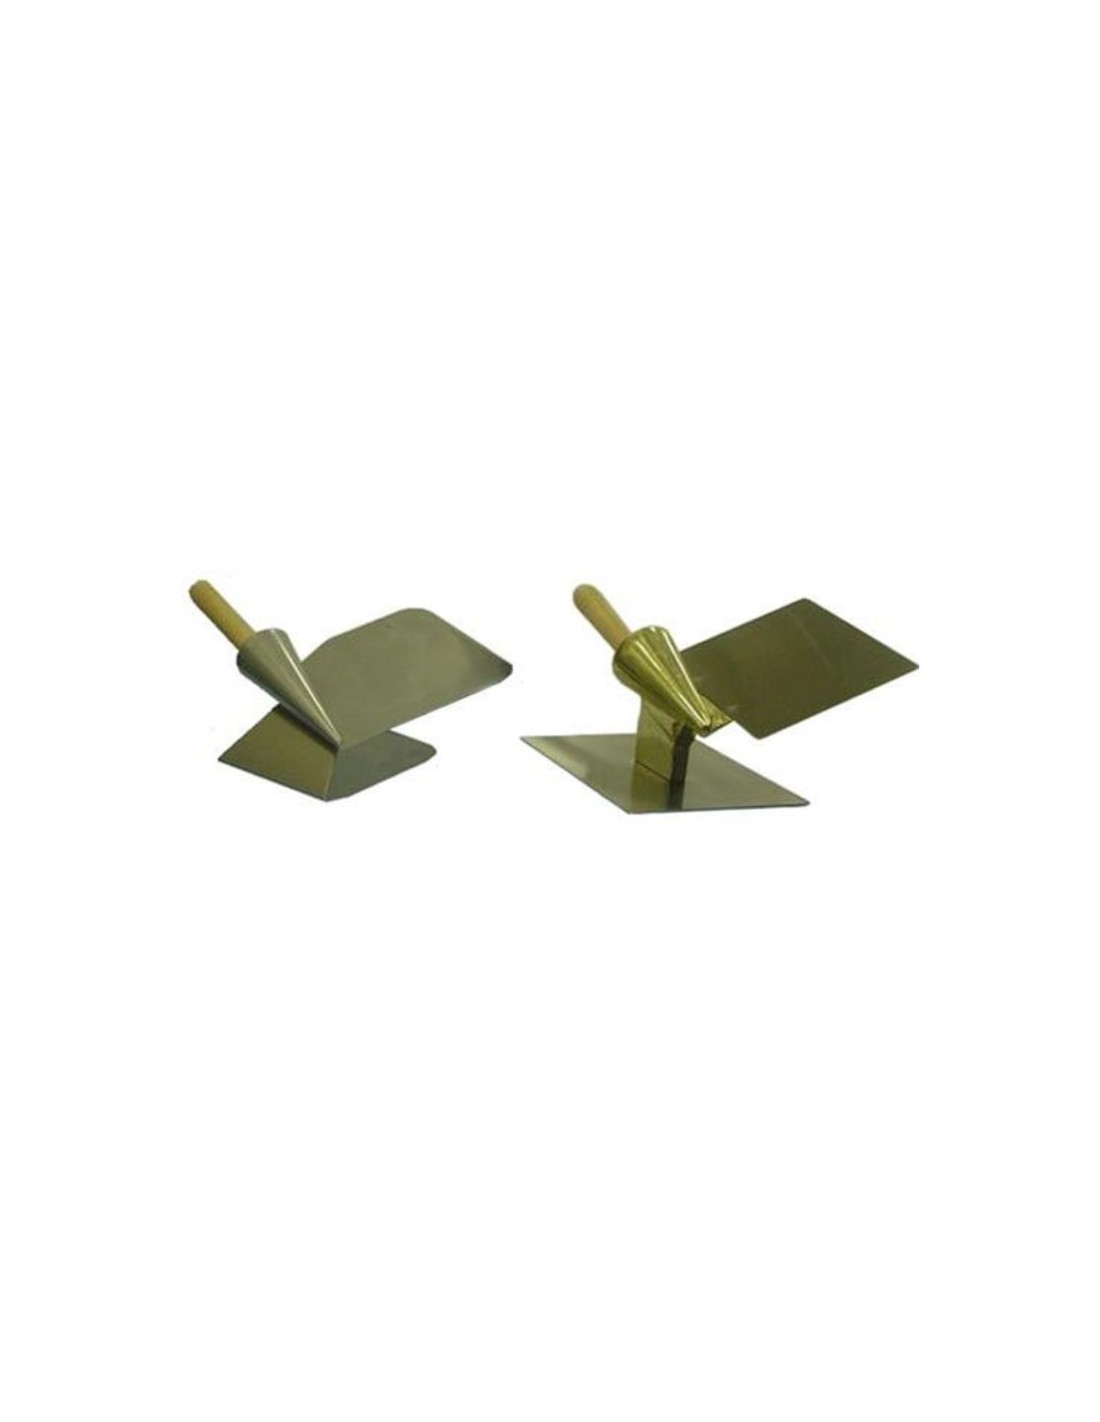 Long steel impeller (Ø 6.5 cm and LUNGO 19.5 cm) - (sold only combined with machines )